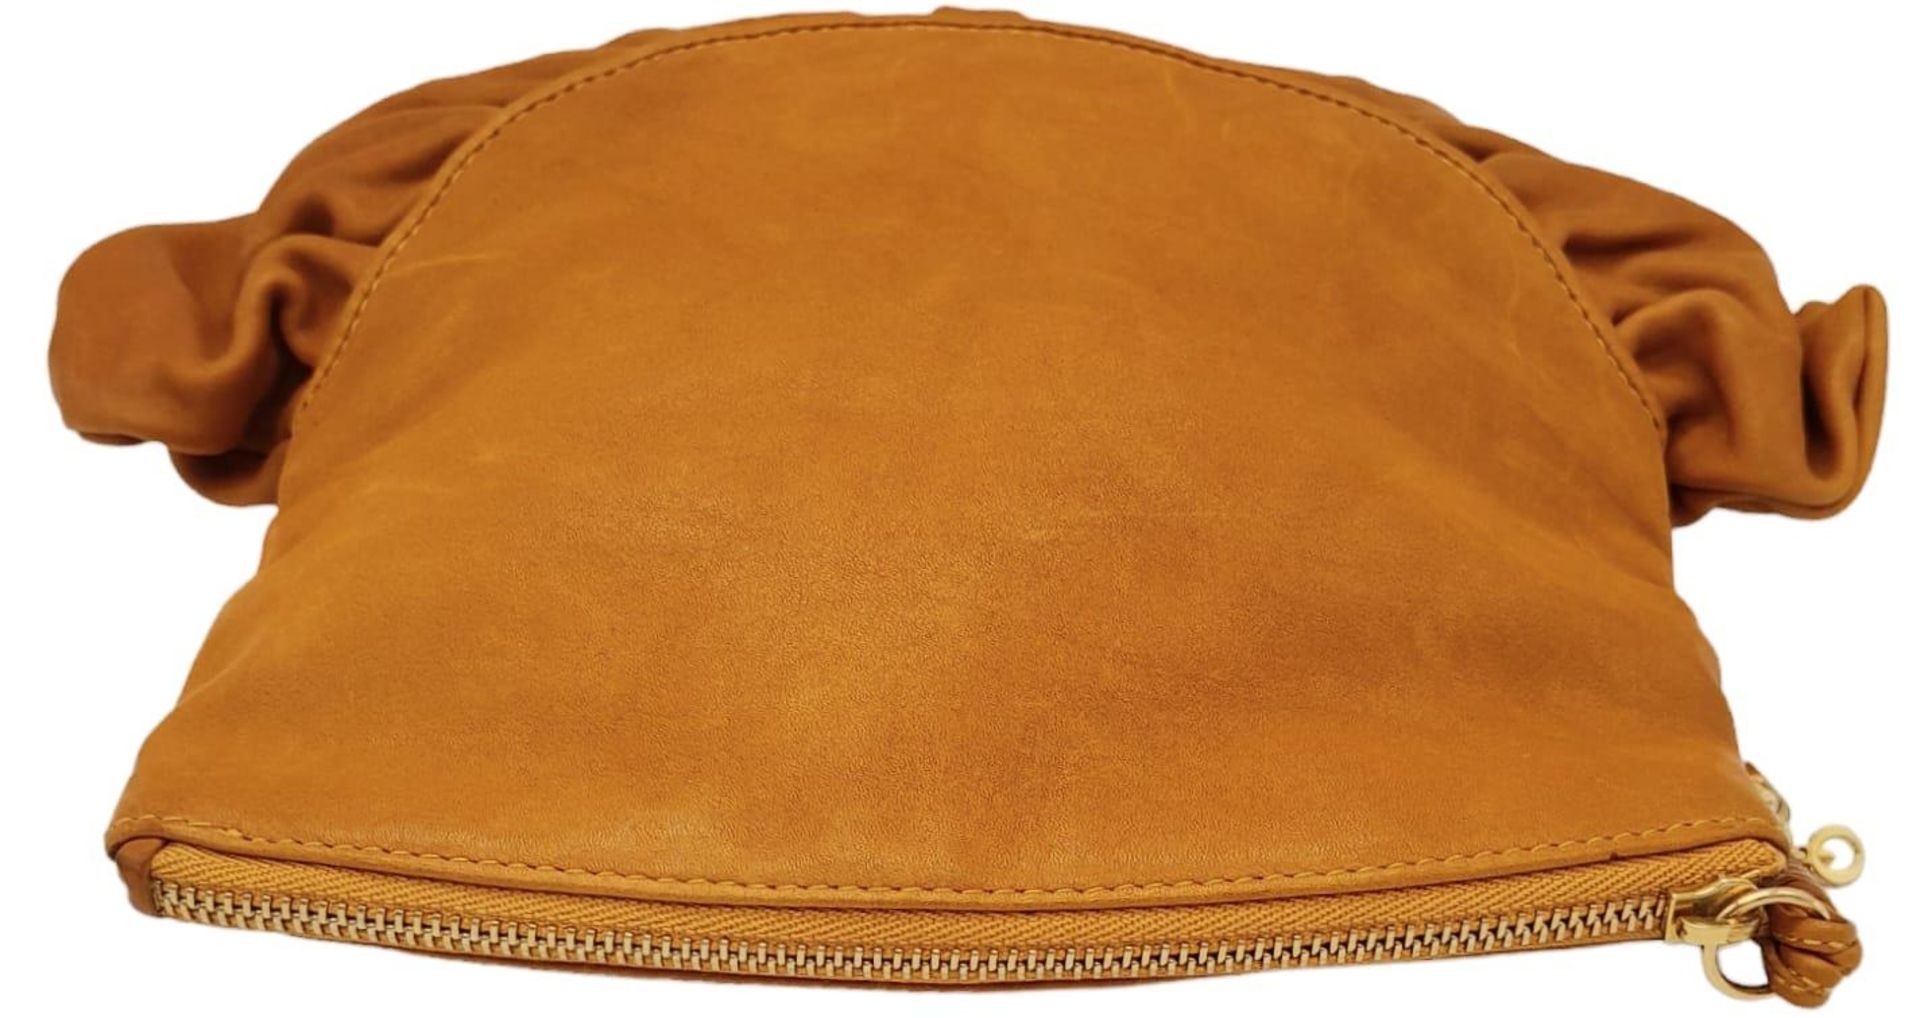 A Christian Dior Caramel Ruffled Clutch Bag. Leather exterior with gold-toned hardware and a - Image 6 of 9